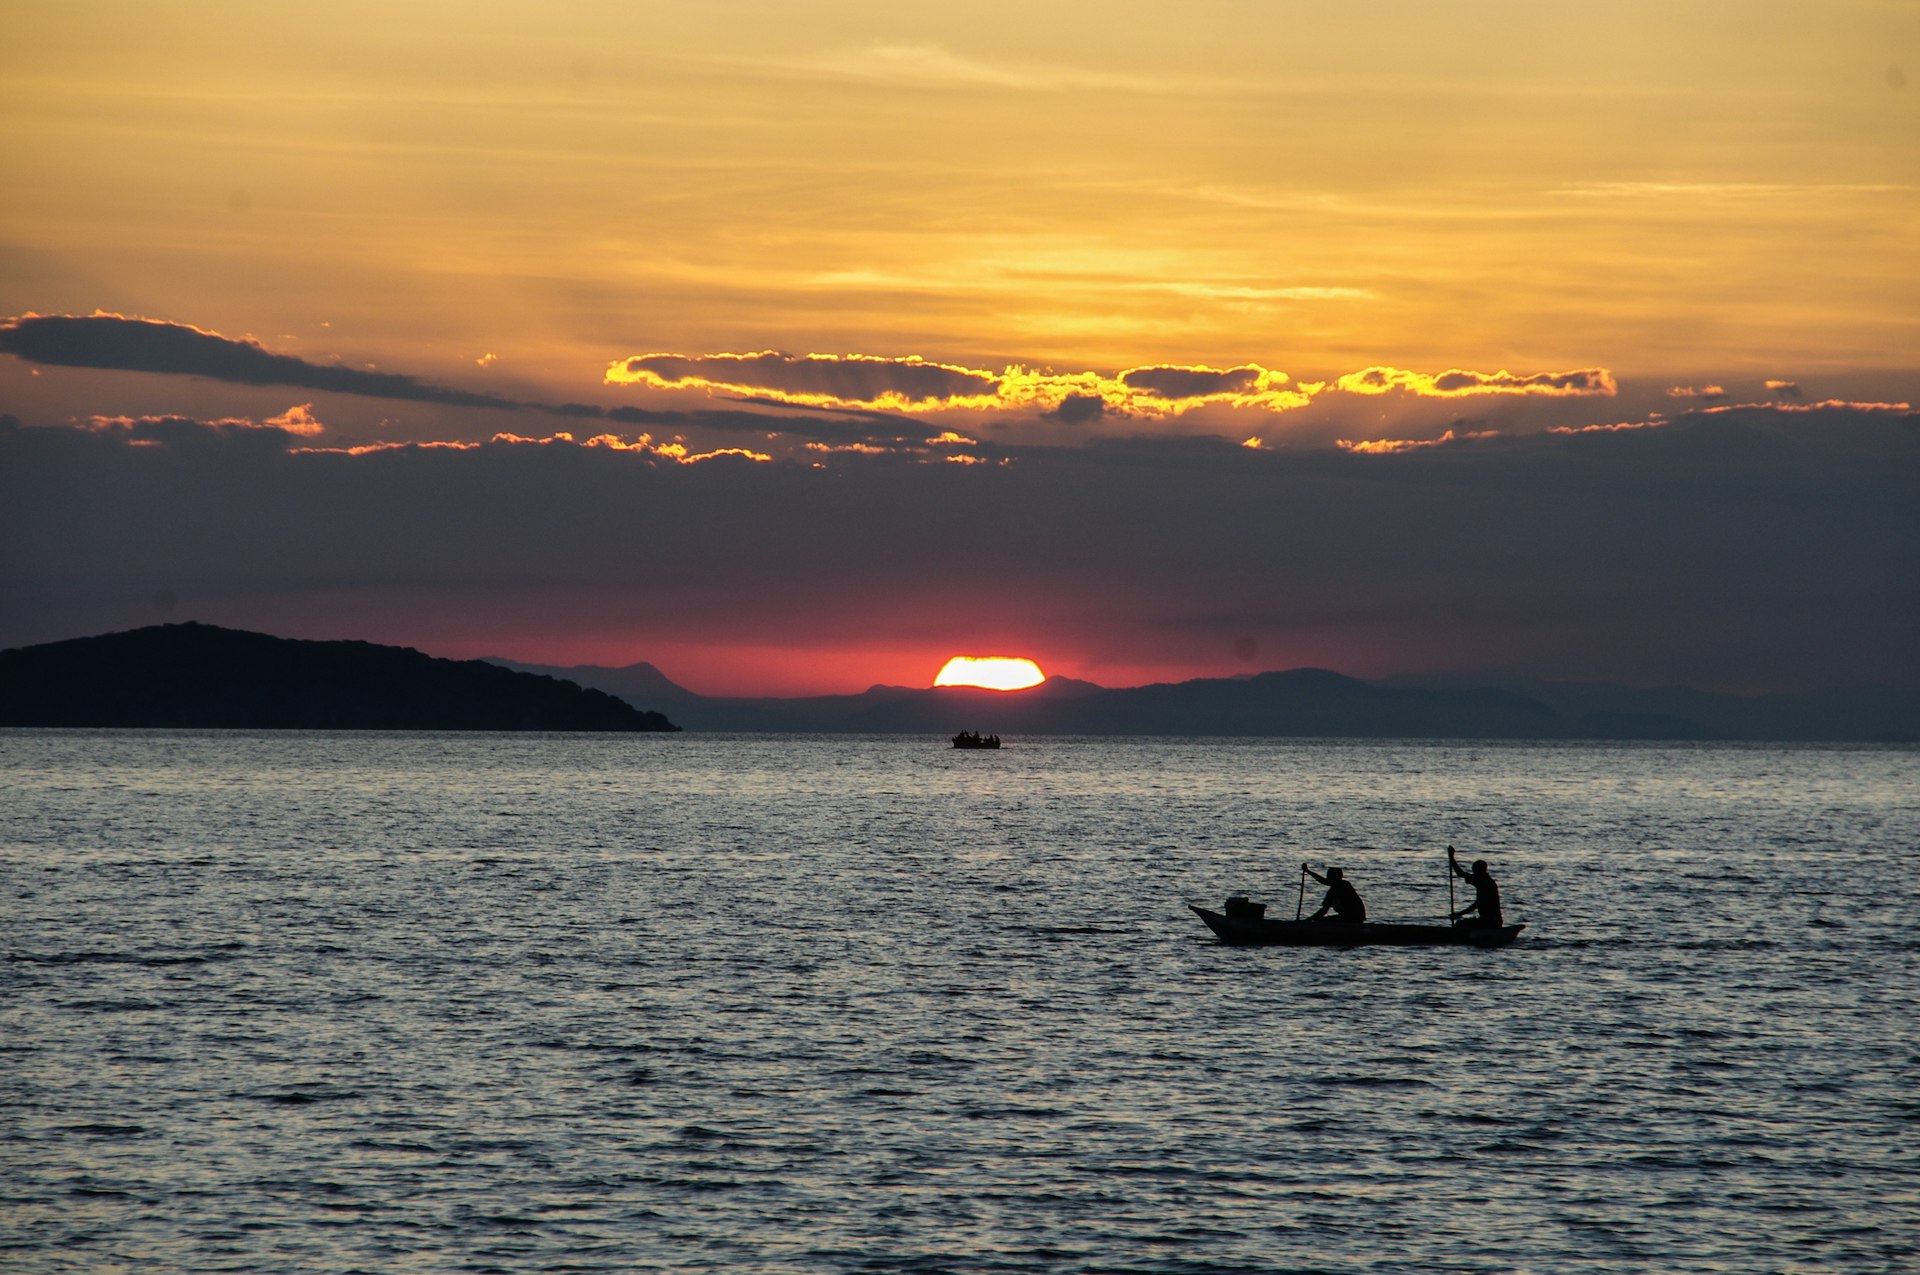 Two fishers in a dugout canoe are paddling on a lake as the sun sets, covering the sky in orange and purple